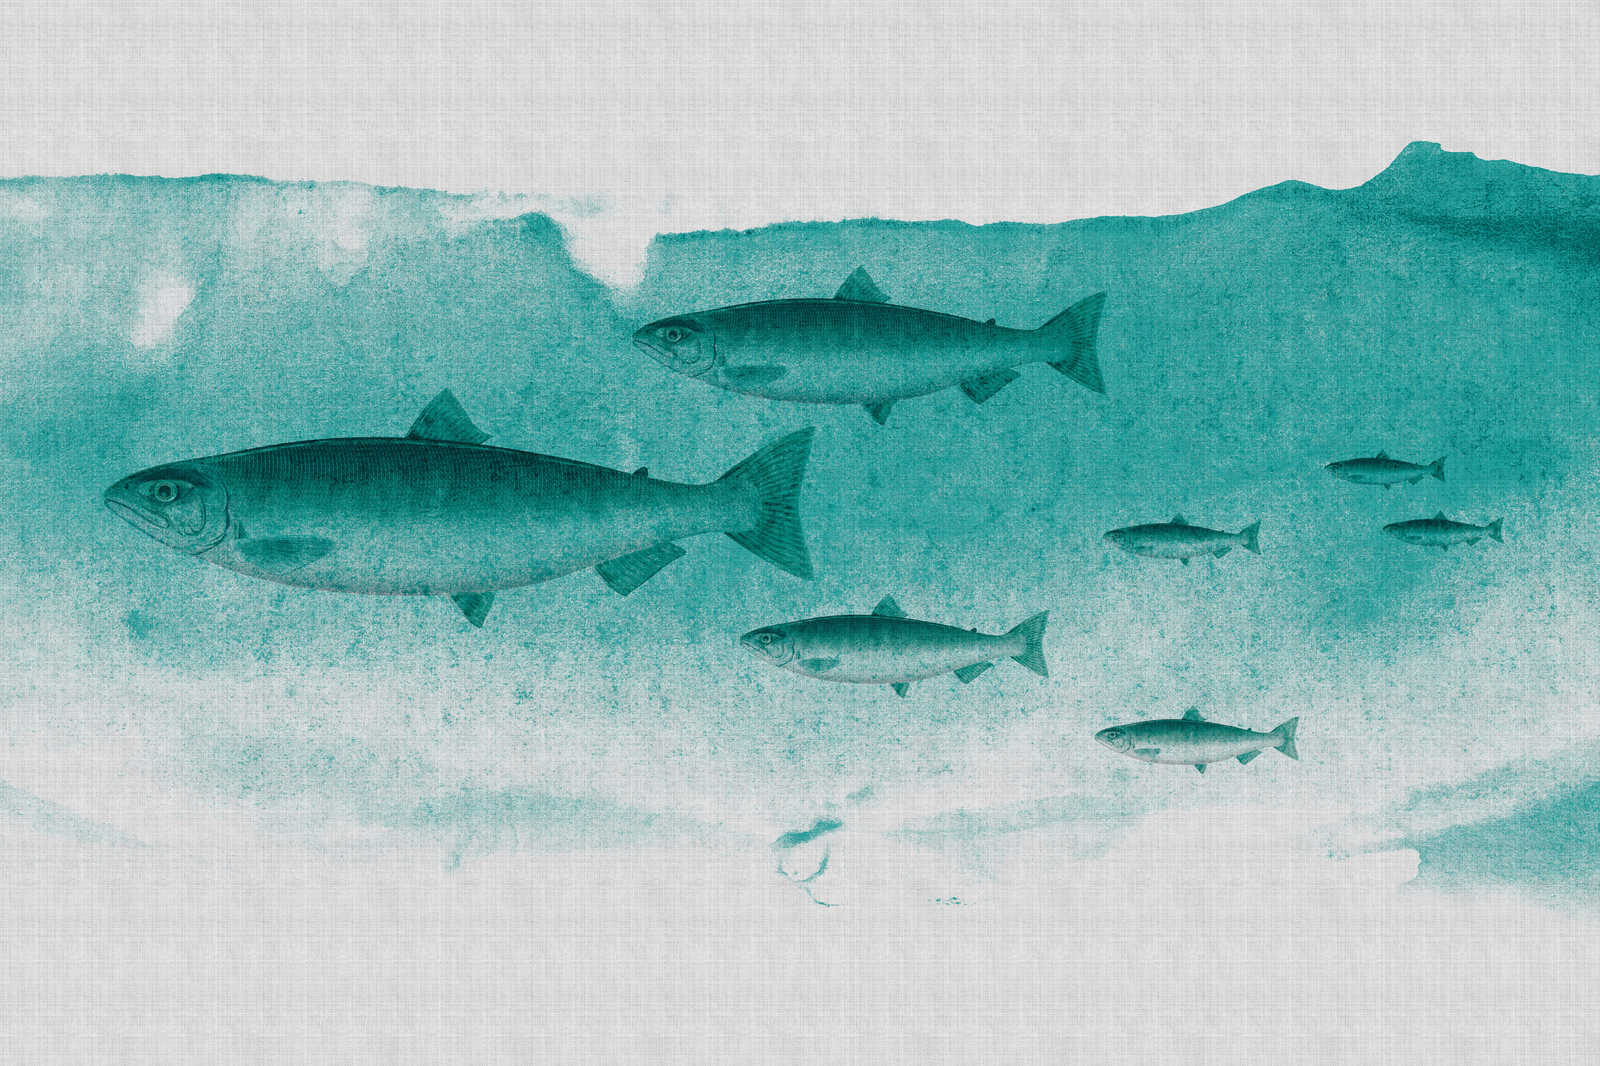             Into the blue 2 - Fish watercolour in green as canvas picture - natural linen structure - 0.90 m x 0.60 m
        